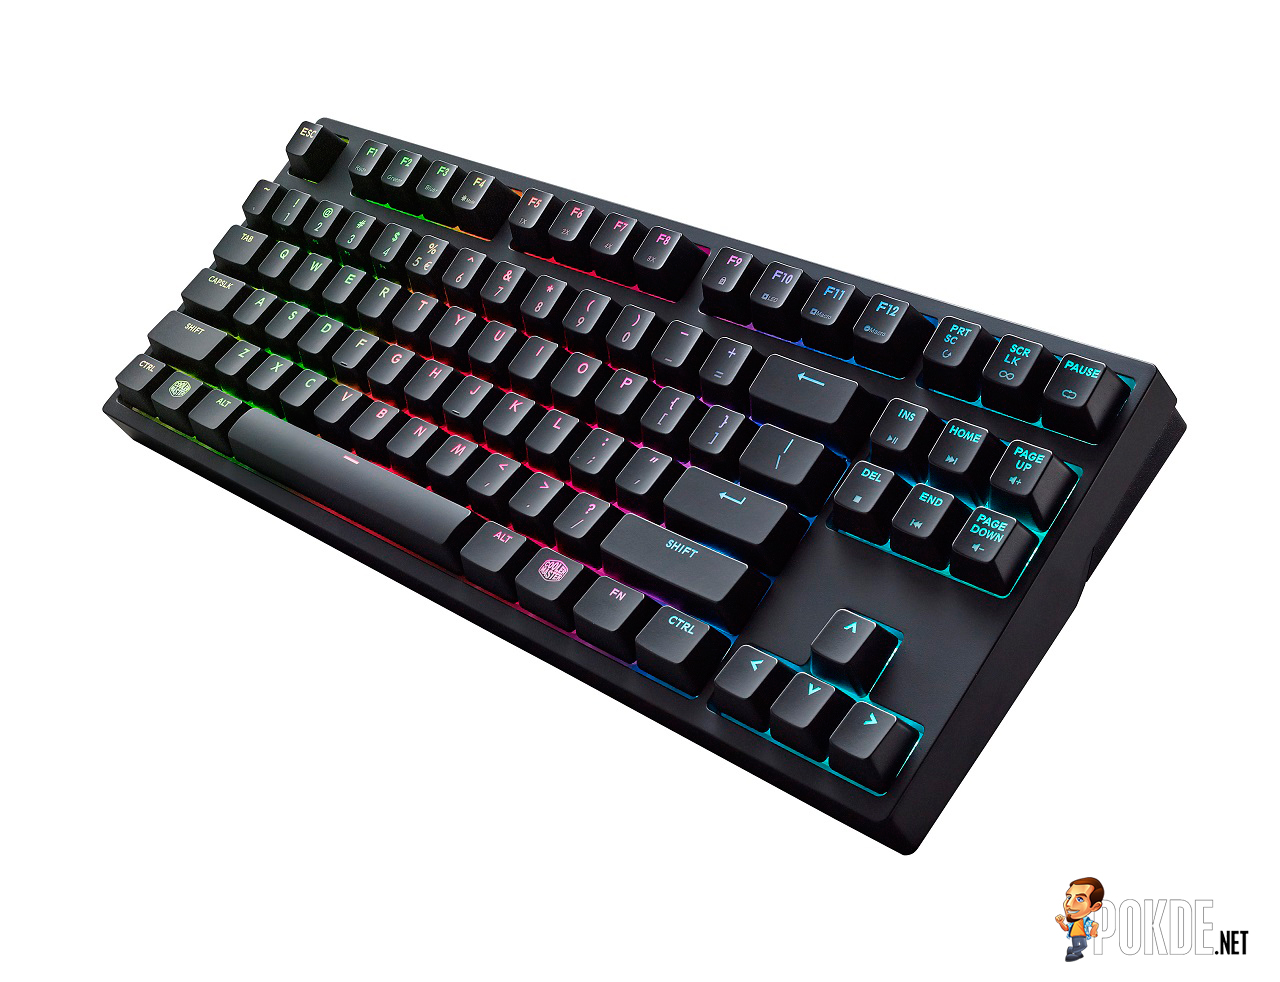 Cooler Master Announces RGB Keyboards 32